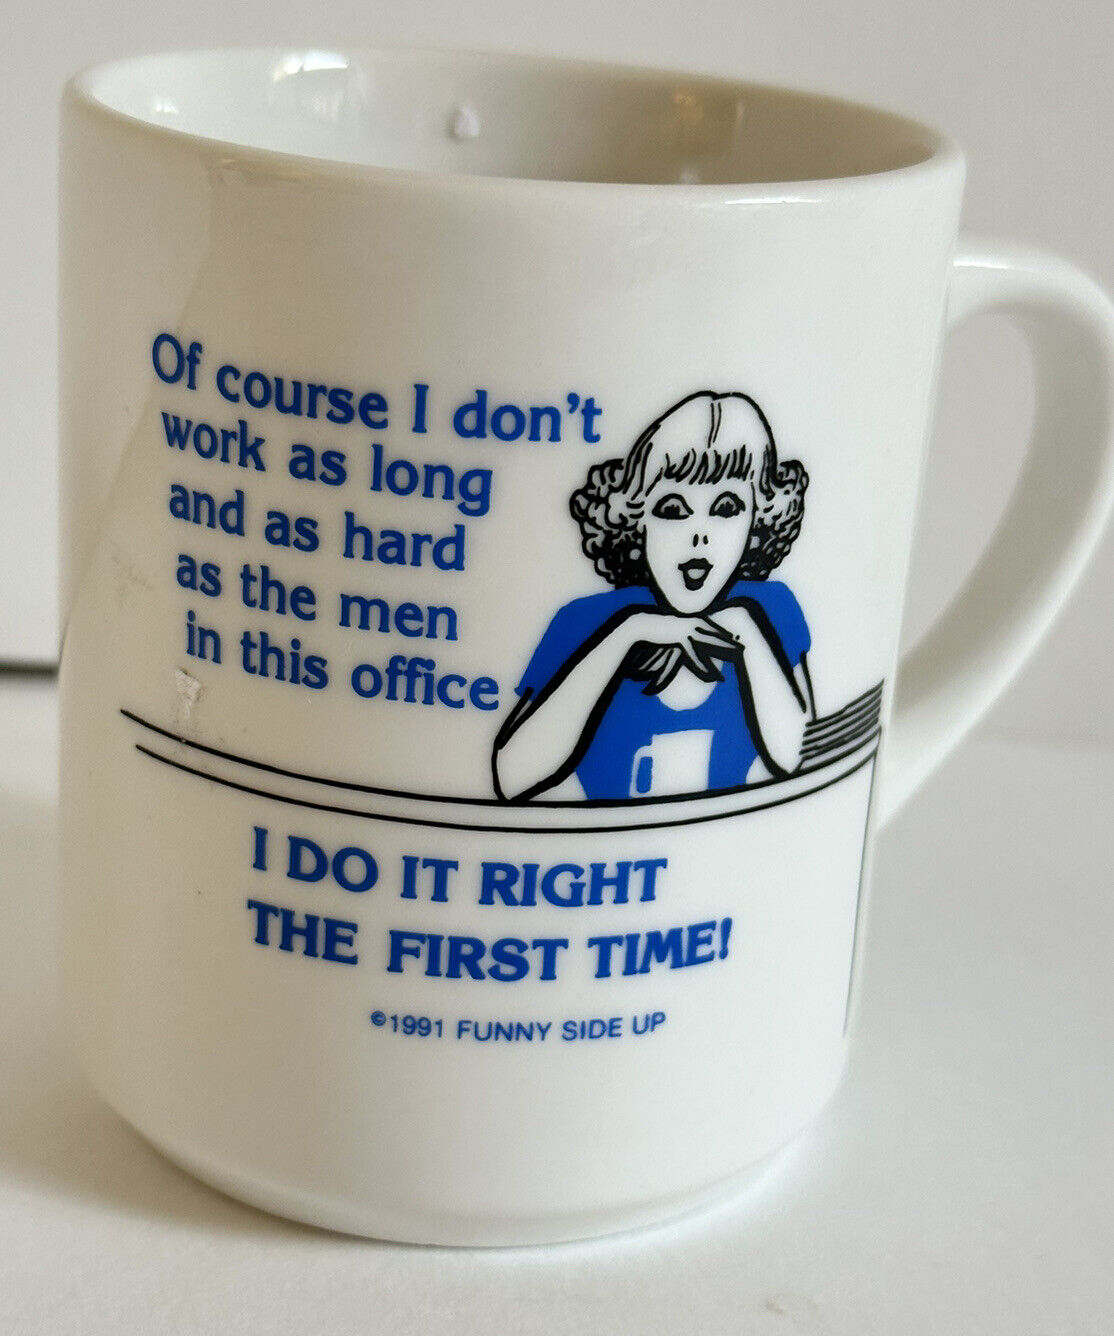 Funny Side Up Mug” I Do It Right The First Time”  1991 Girl Power Women’s Lib